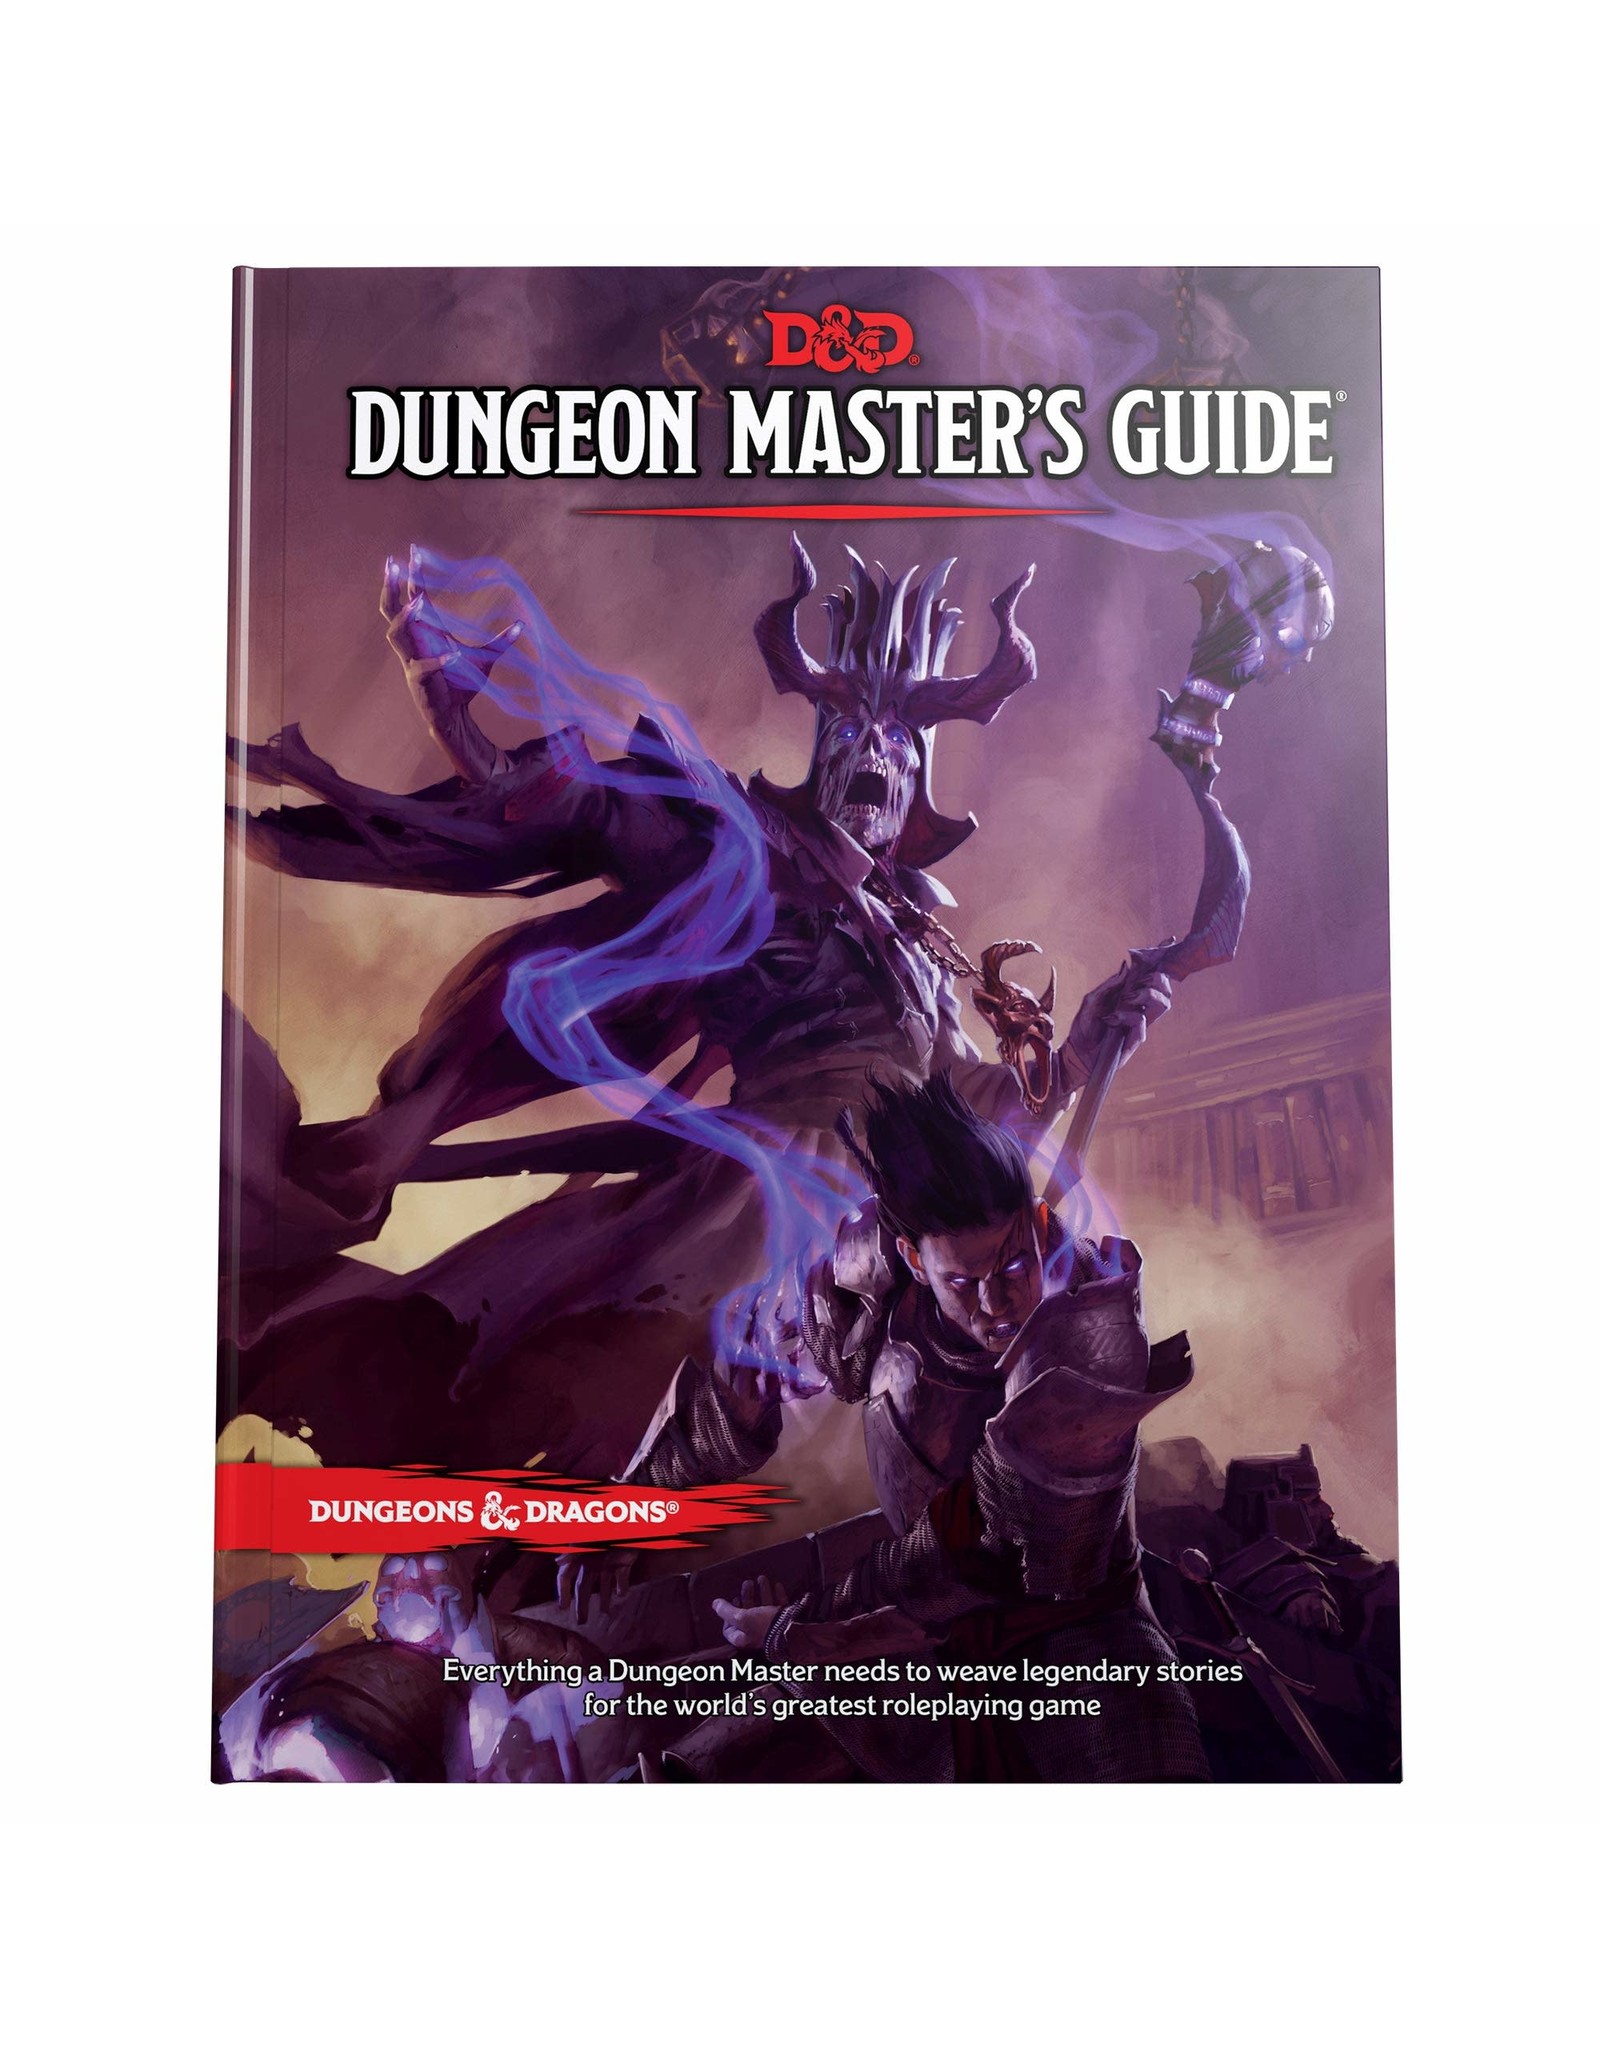 Dungeons and Dragons RPG: Dungeon Masters Guide